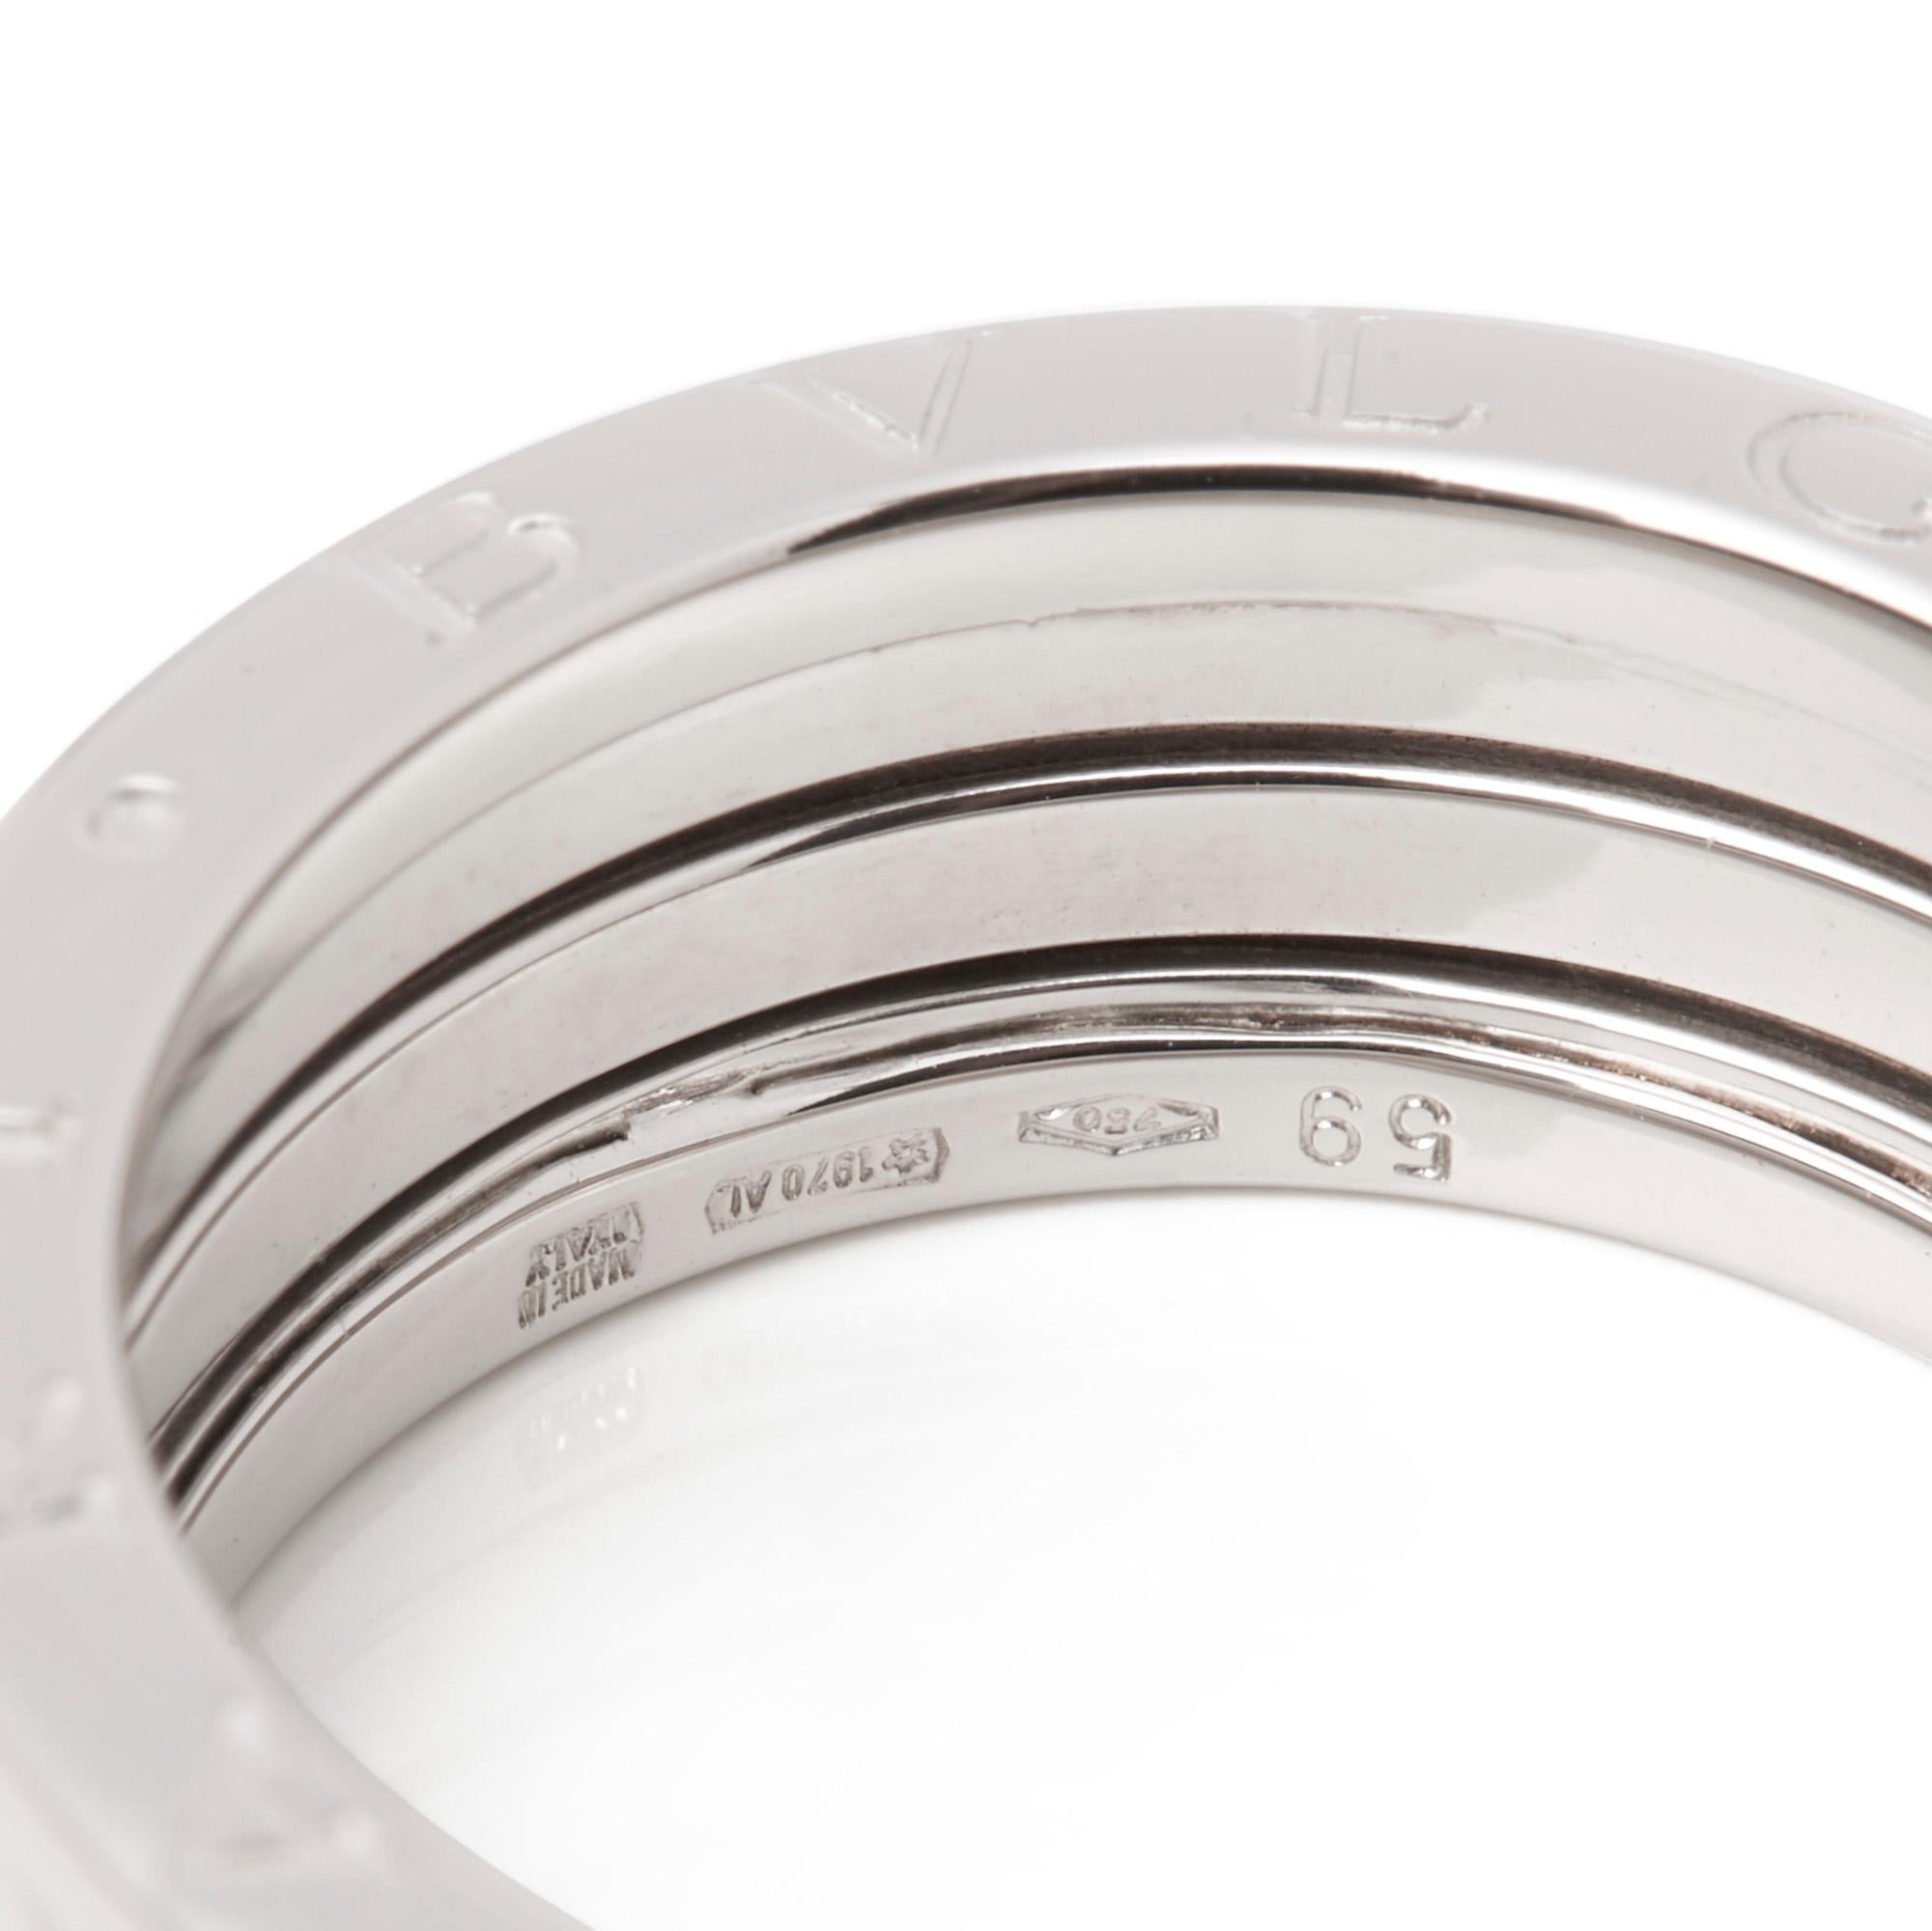 This ring by Bulgari is from their BZero1 collection and features a distinctive three band spiral design in 18ct white gold. UK Ring Size R, EU size 59, US size 8 3/4. Complete with a Xupes presentation box. Our Xupes reference is J671 should you